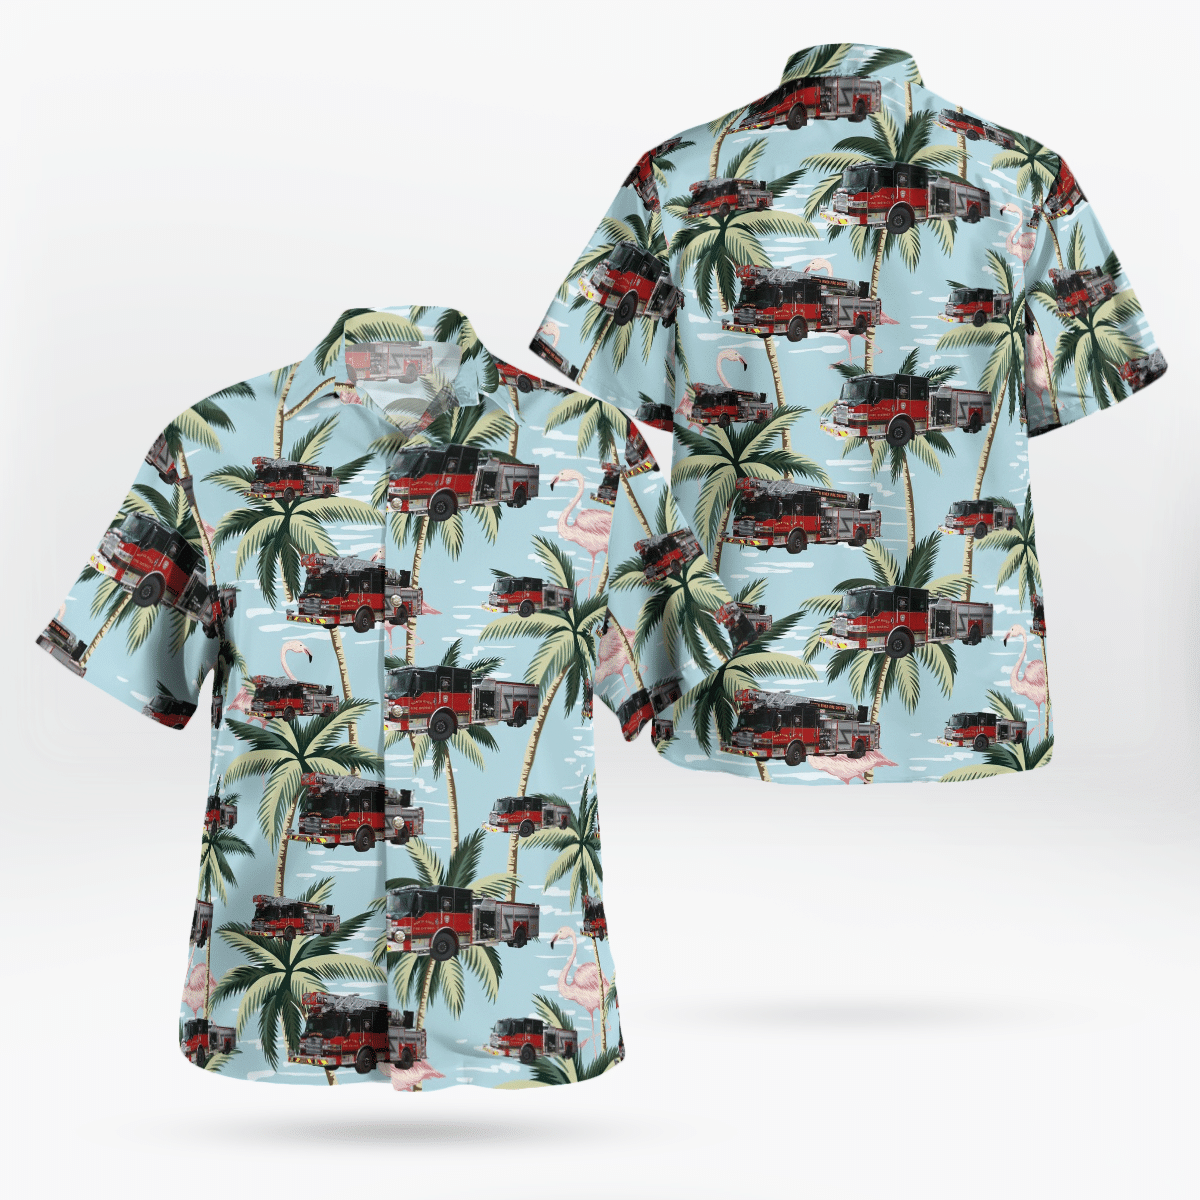 If you are in need of a new summertime look, pick up this Hawaiian shirt 27